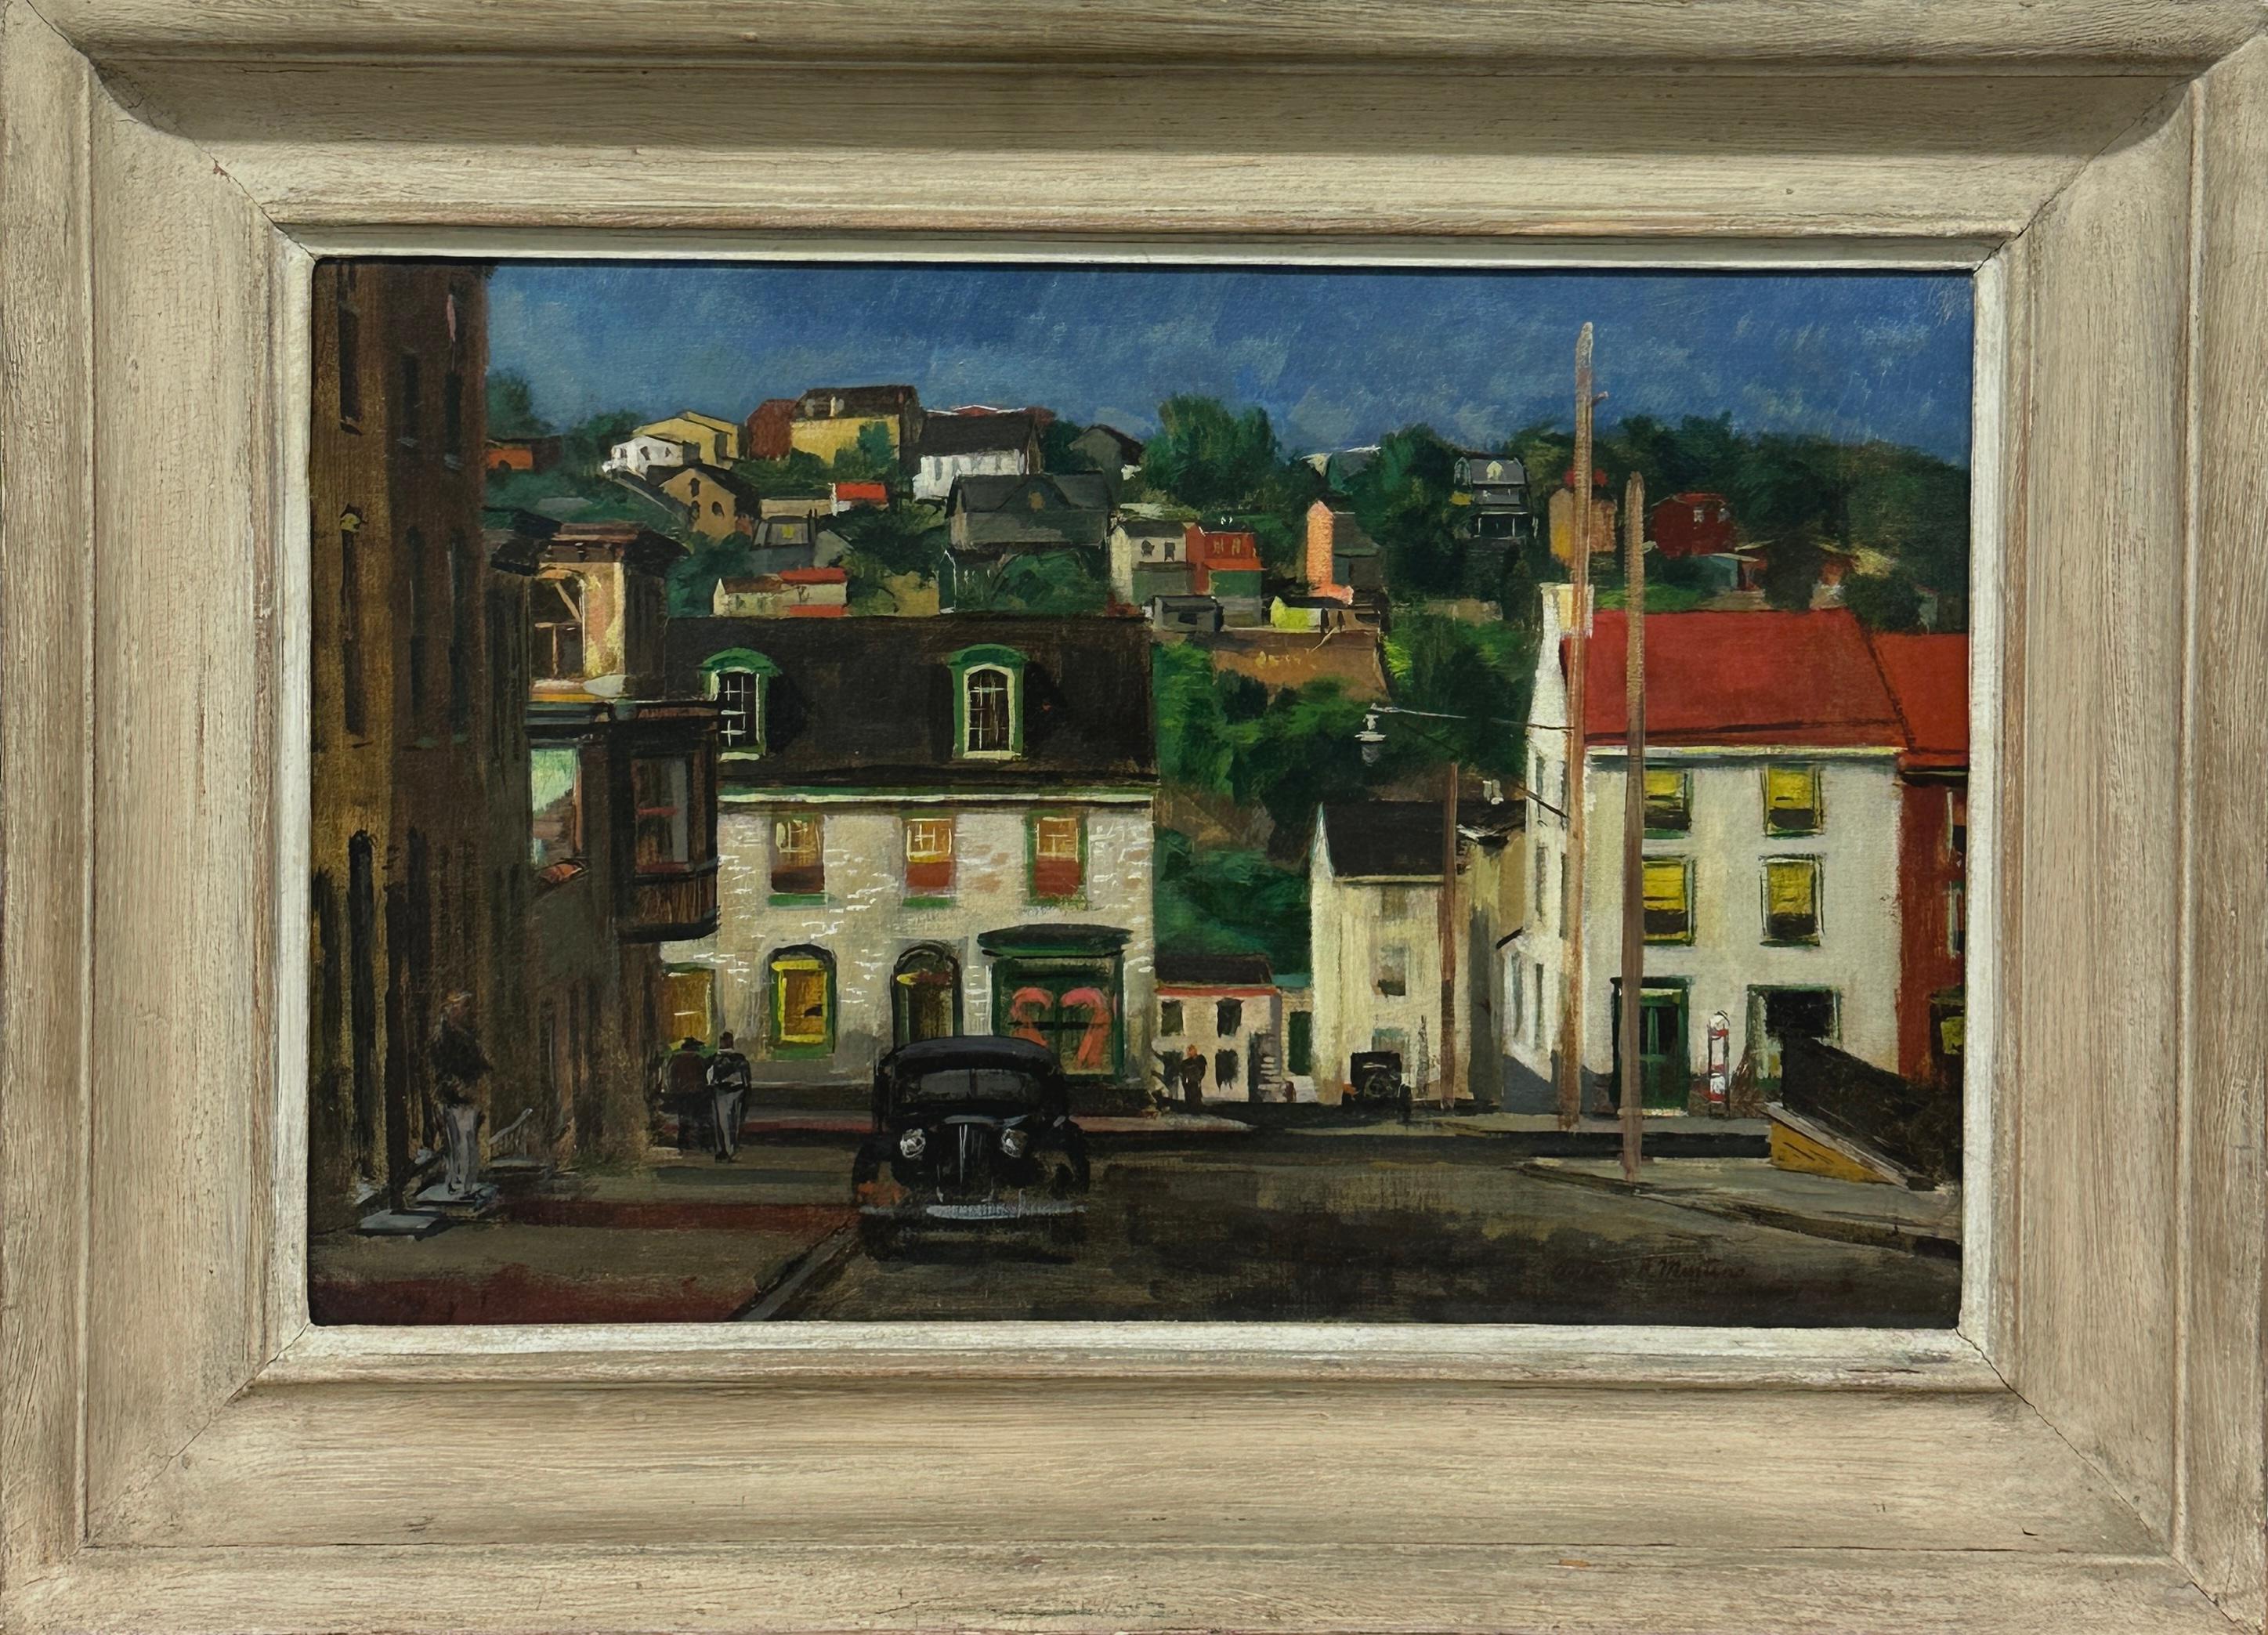 Downtown Philadelphia scene (Manayunk) with antique car by Pennsylvania master  - Painting by Antonio Martino